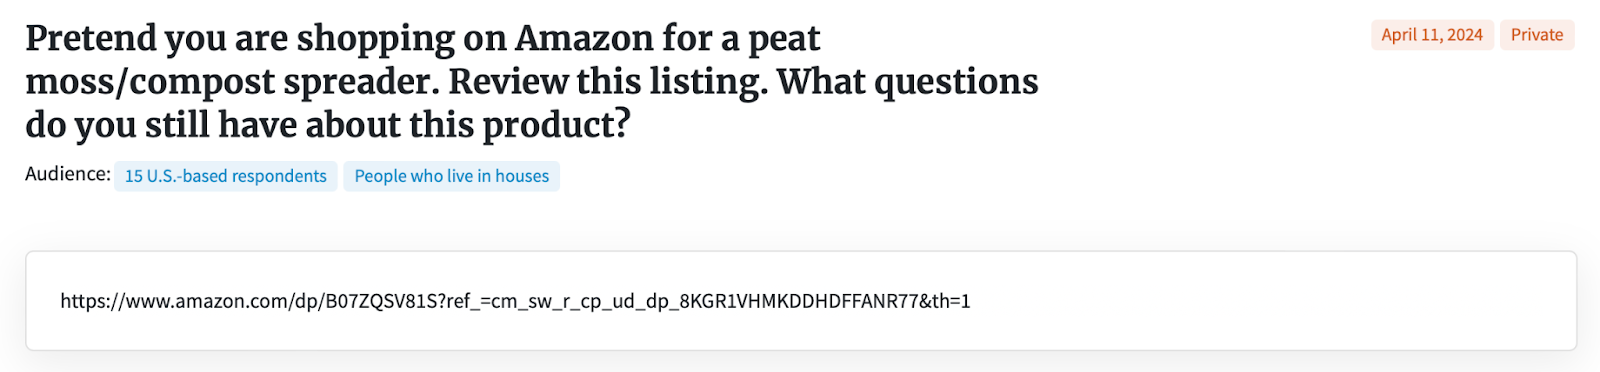 Screenshot of a PickFu survey asking users to visit an Amazon listing link for a peat moss/compost spreader